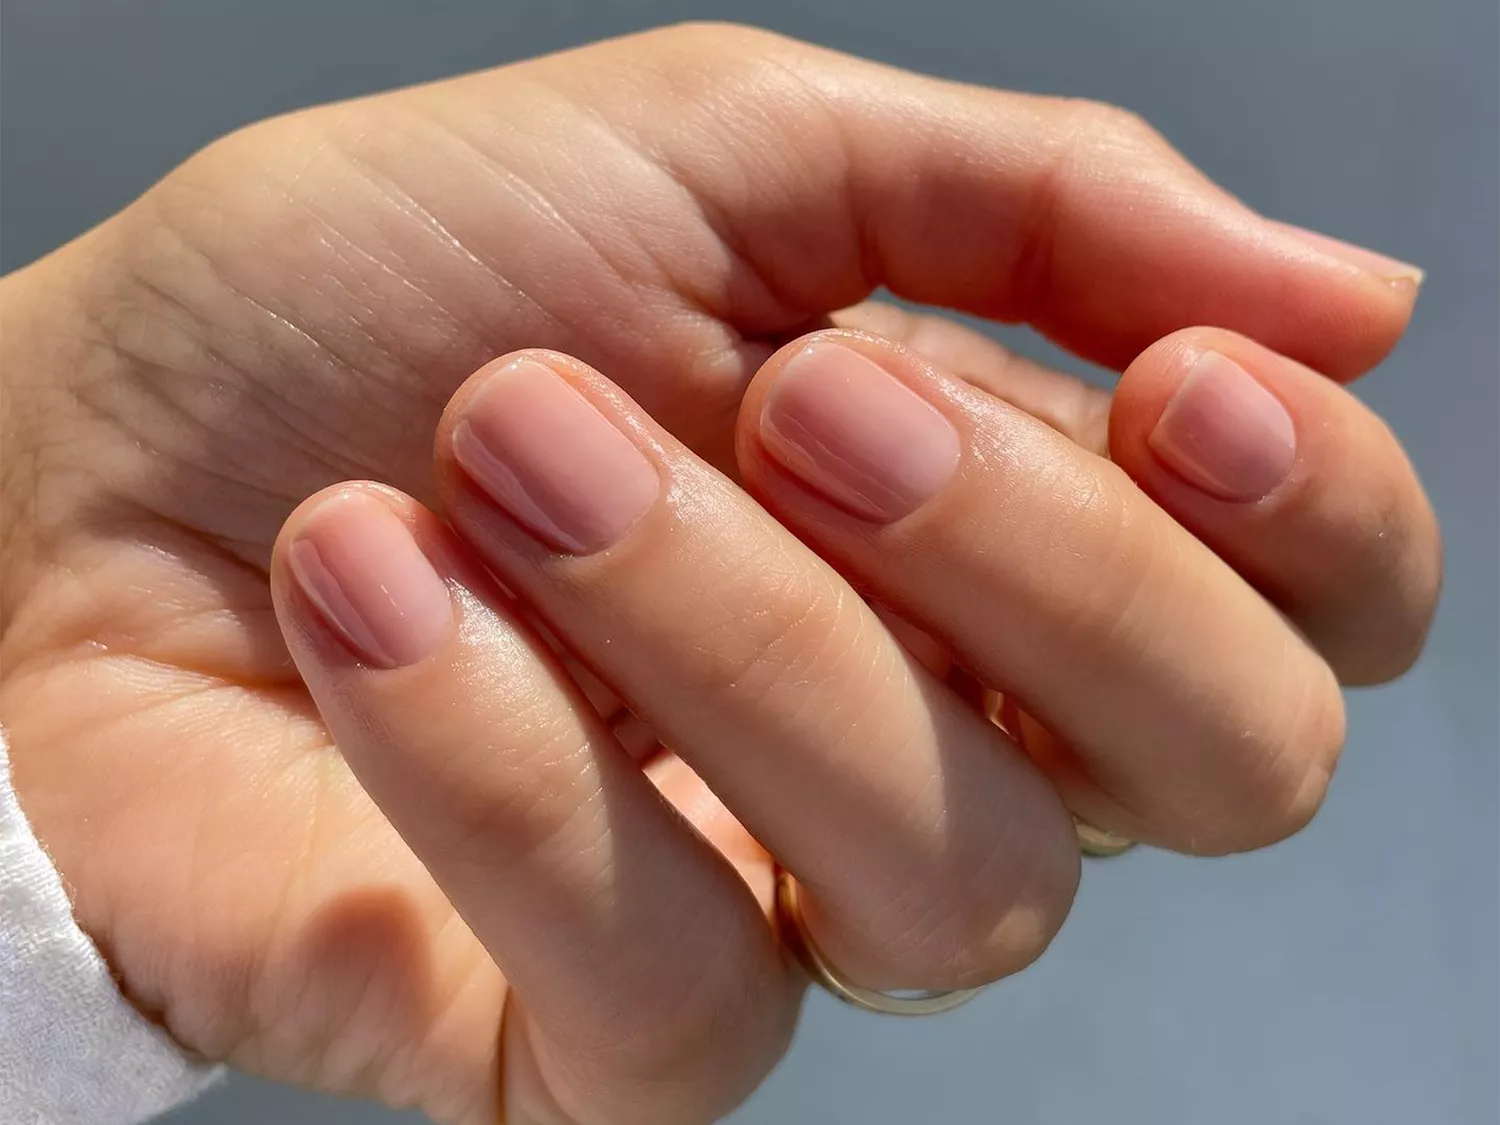 Naked nails trend